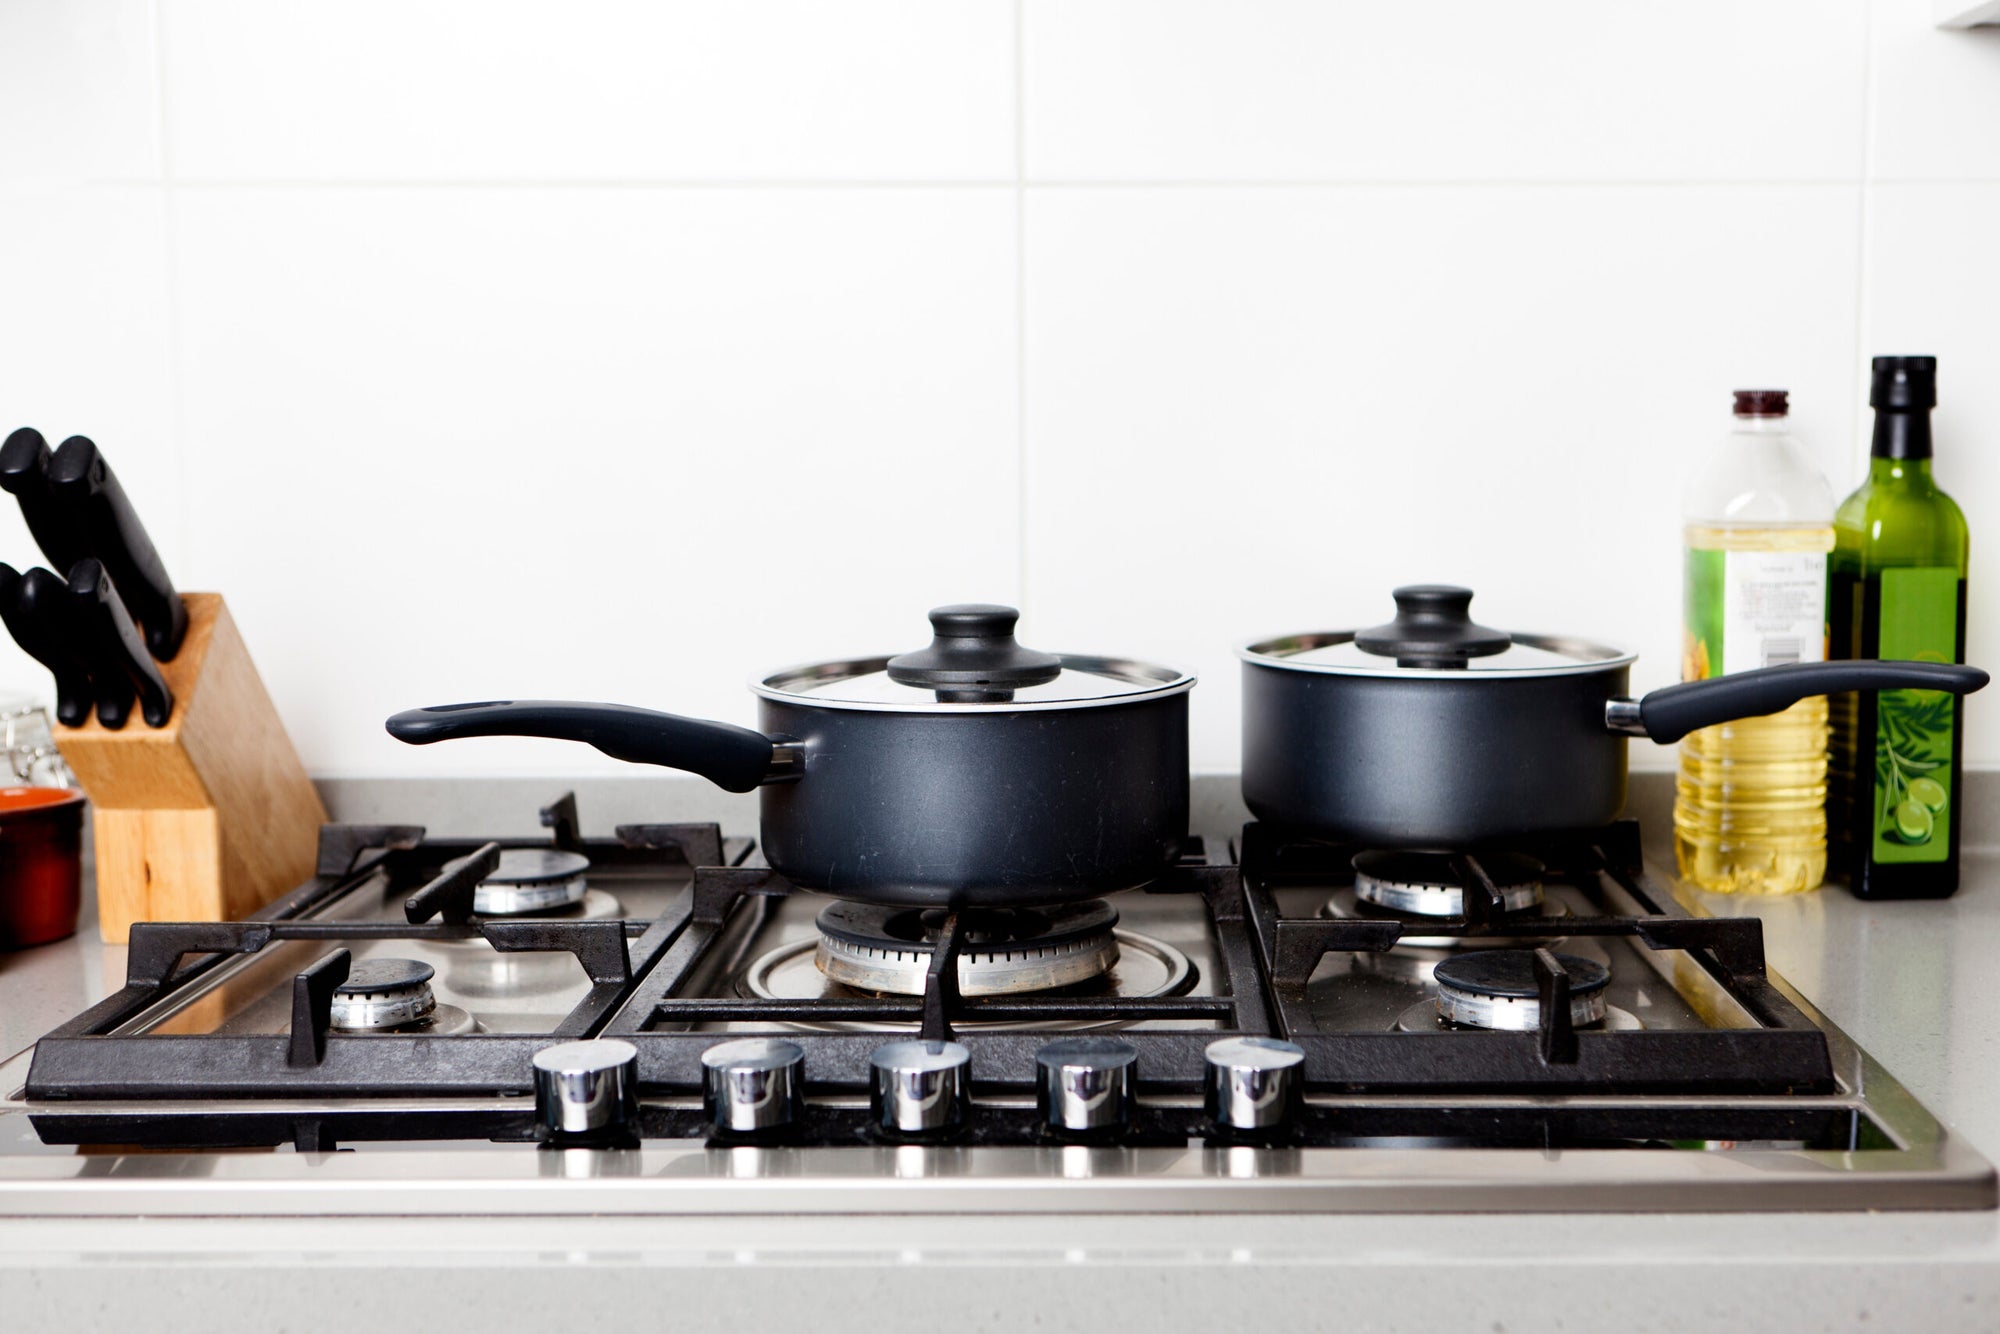 The 4 Best Pots And Pans For Gas Stove (Top Cookware Reviewed)